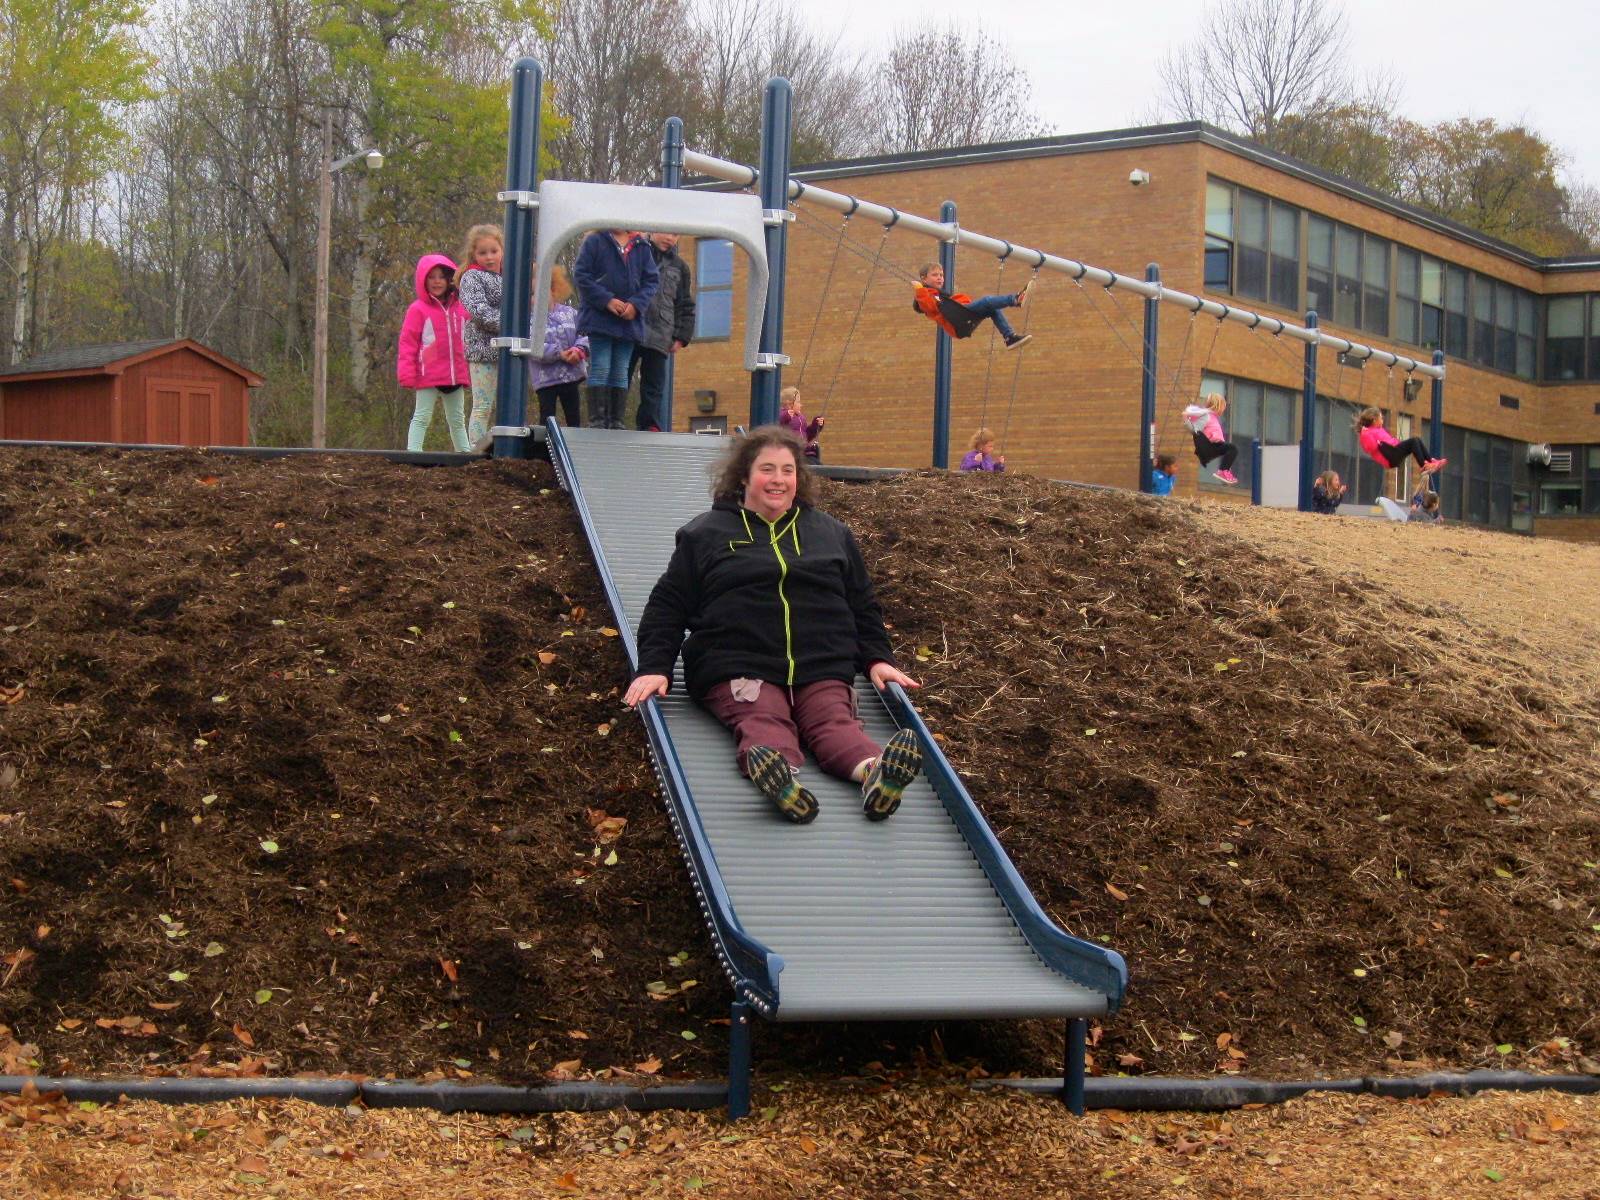 There is Mrs. Margadona on the roller slide for the 5th time!